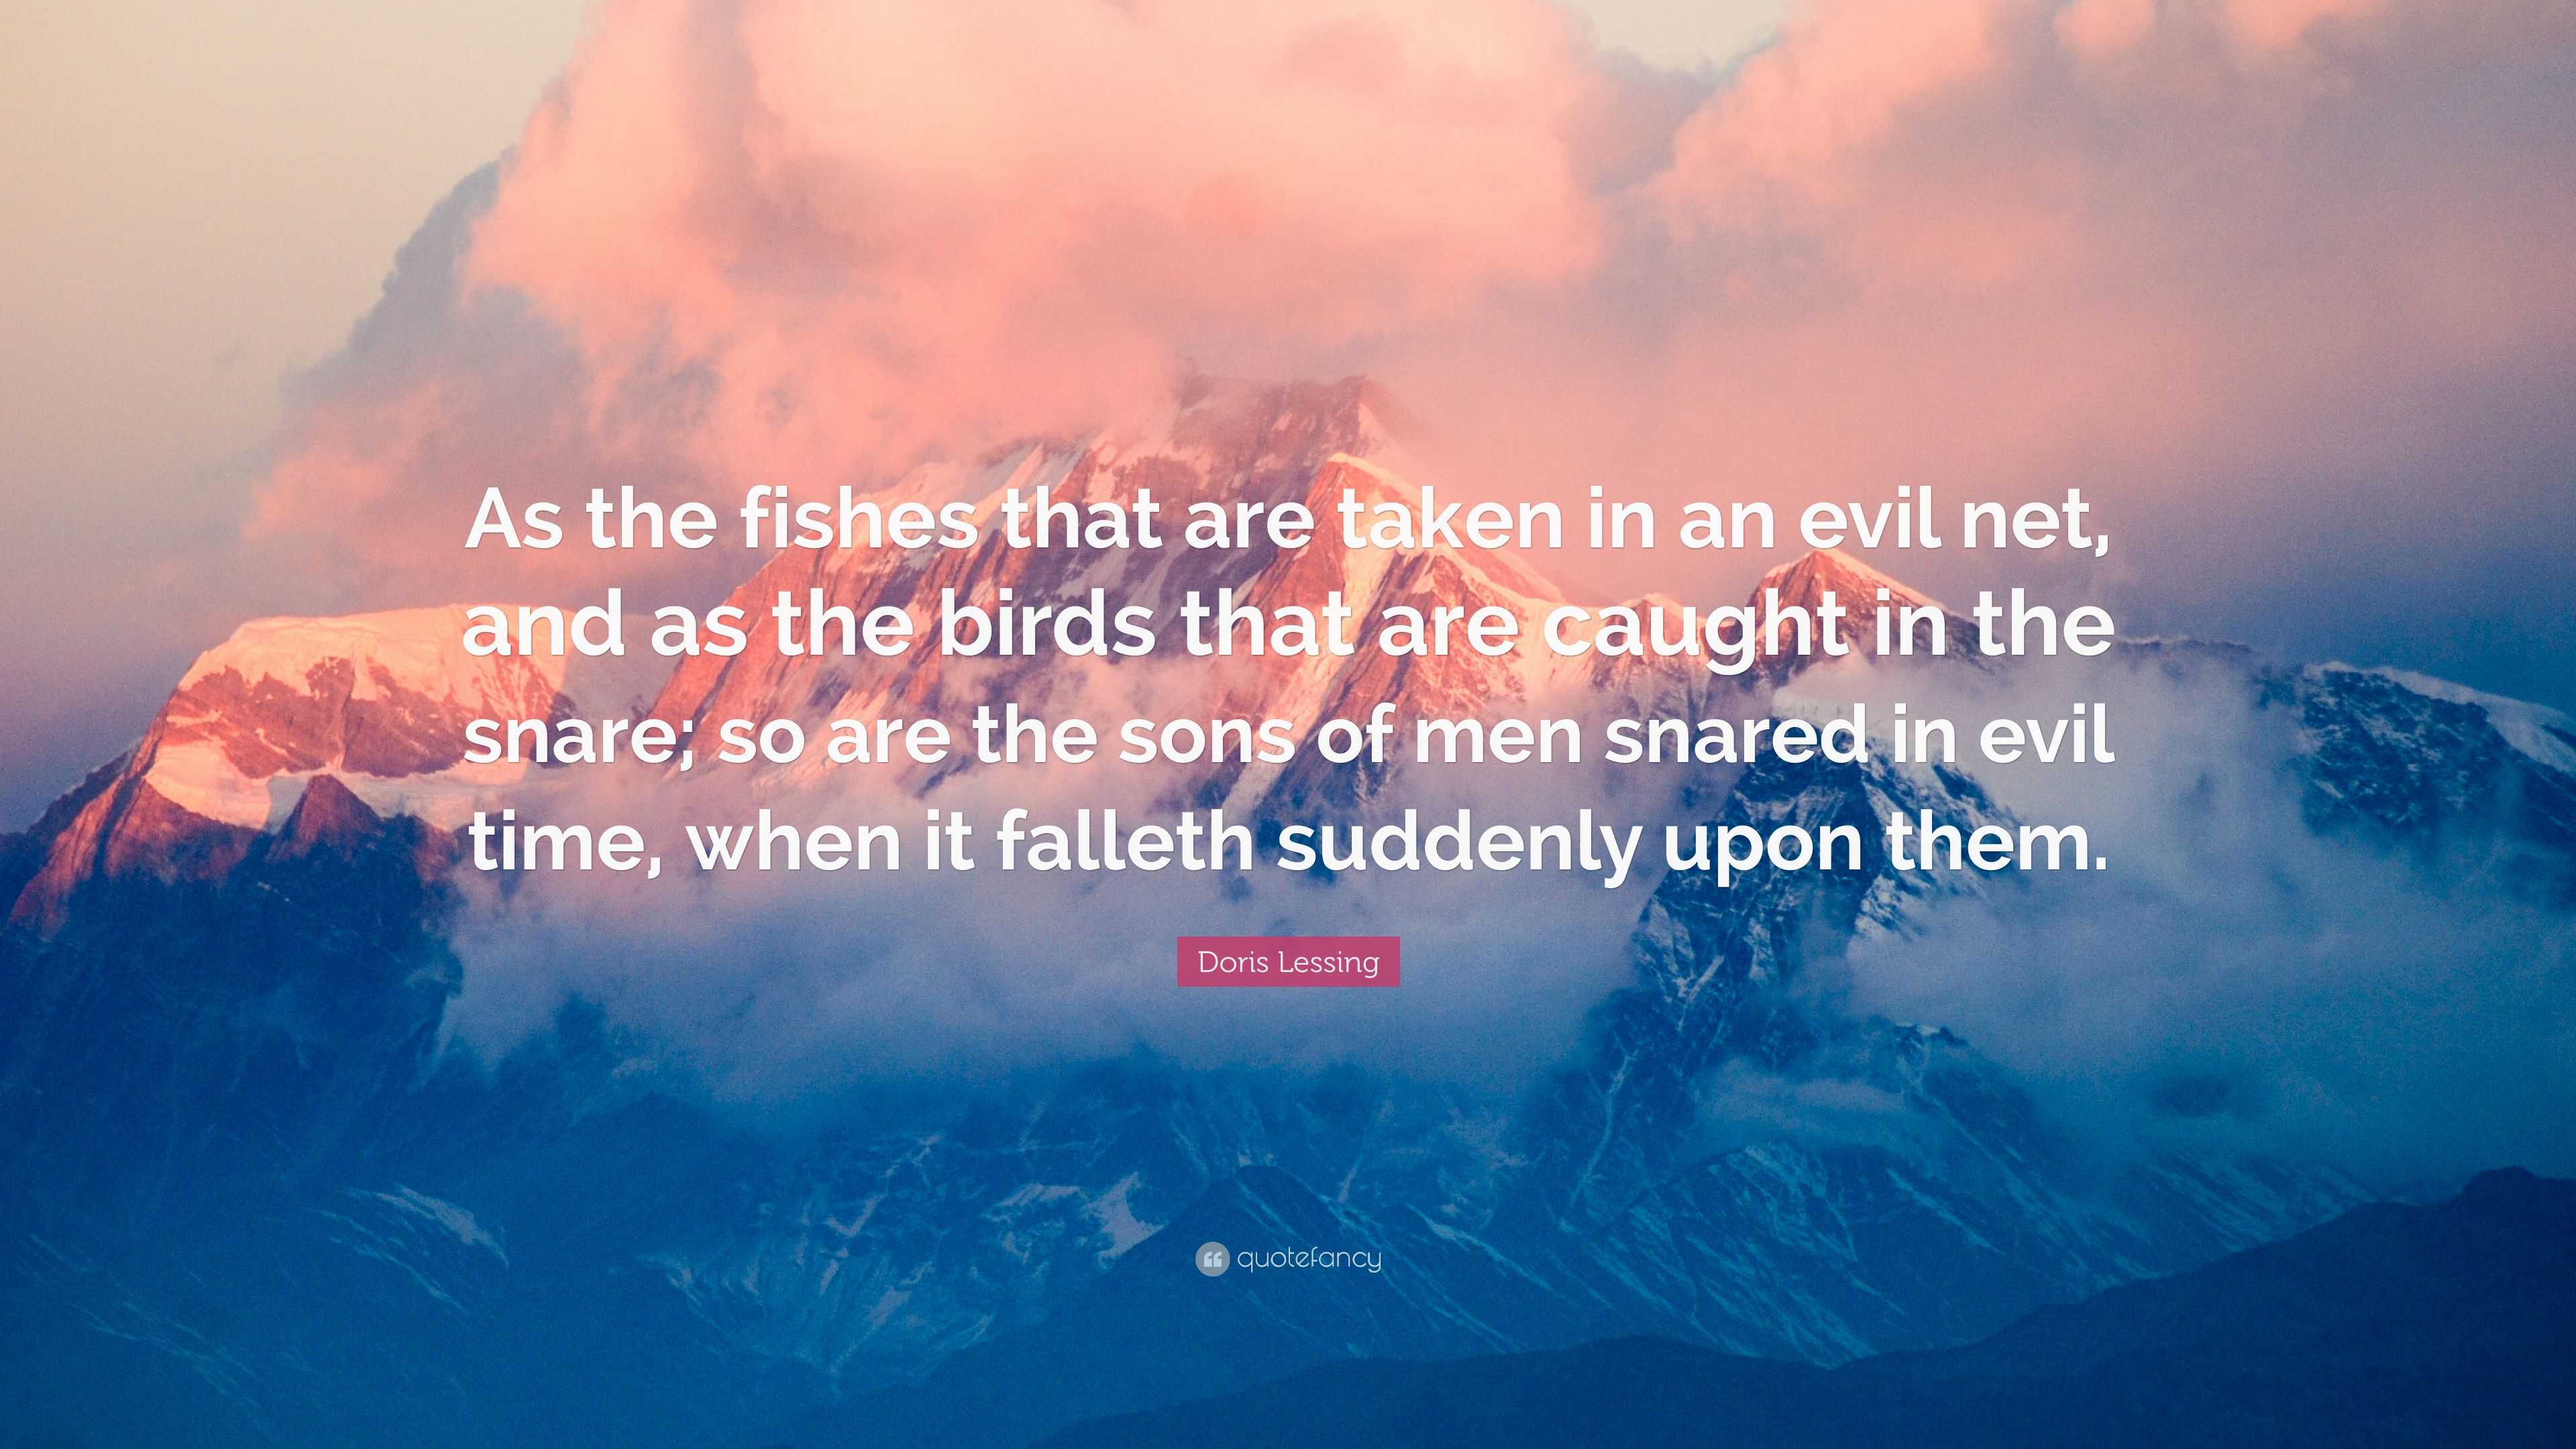 Doris Lessing Quote: “As the fishes that are taken in an evil net, and ...